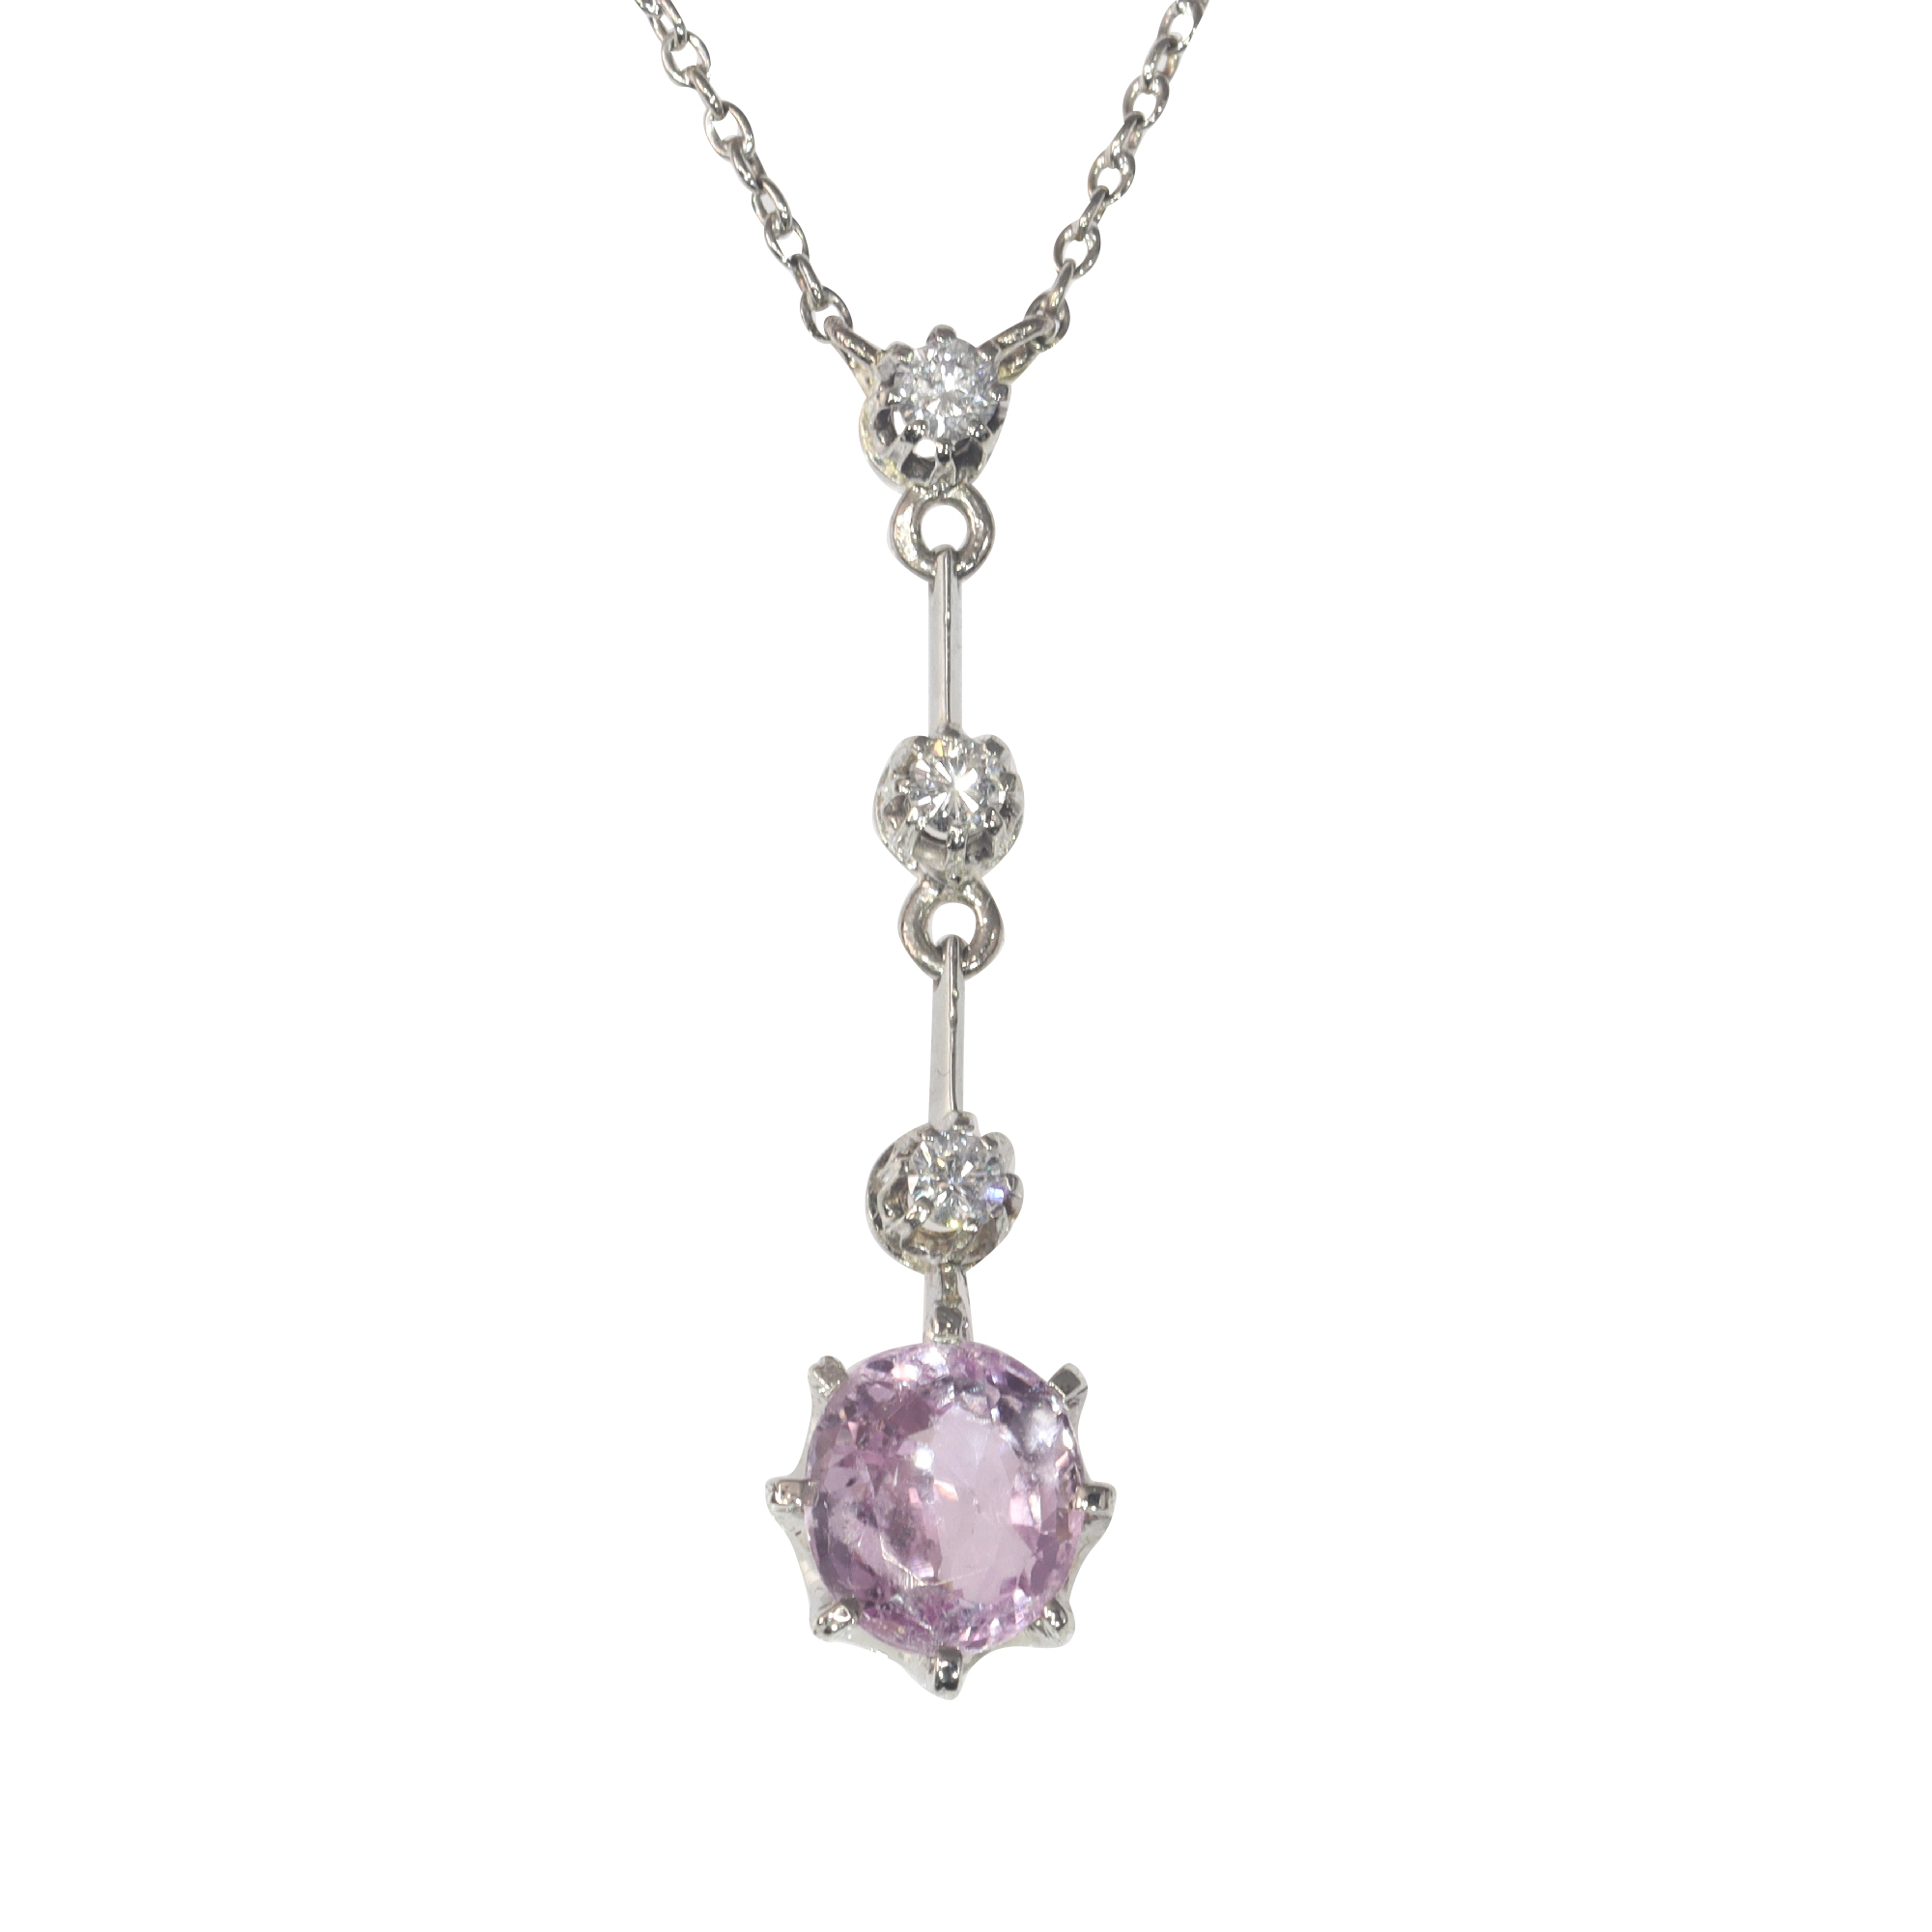 Vintage 1950's diamond pendant with natural untreated pink sapphire